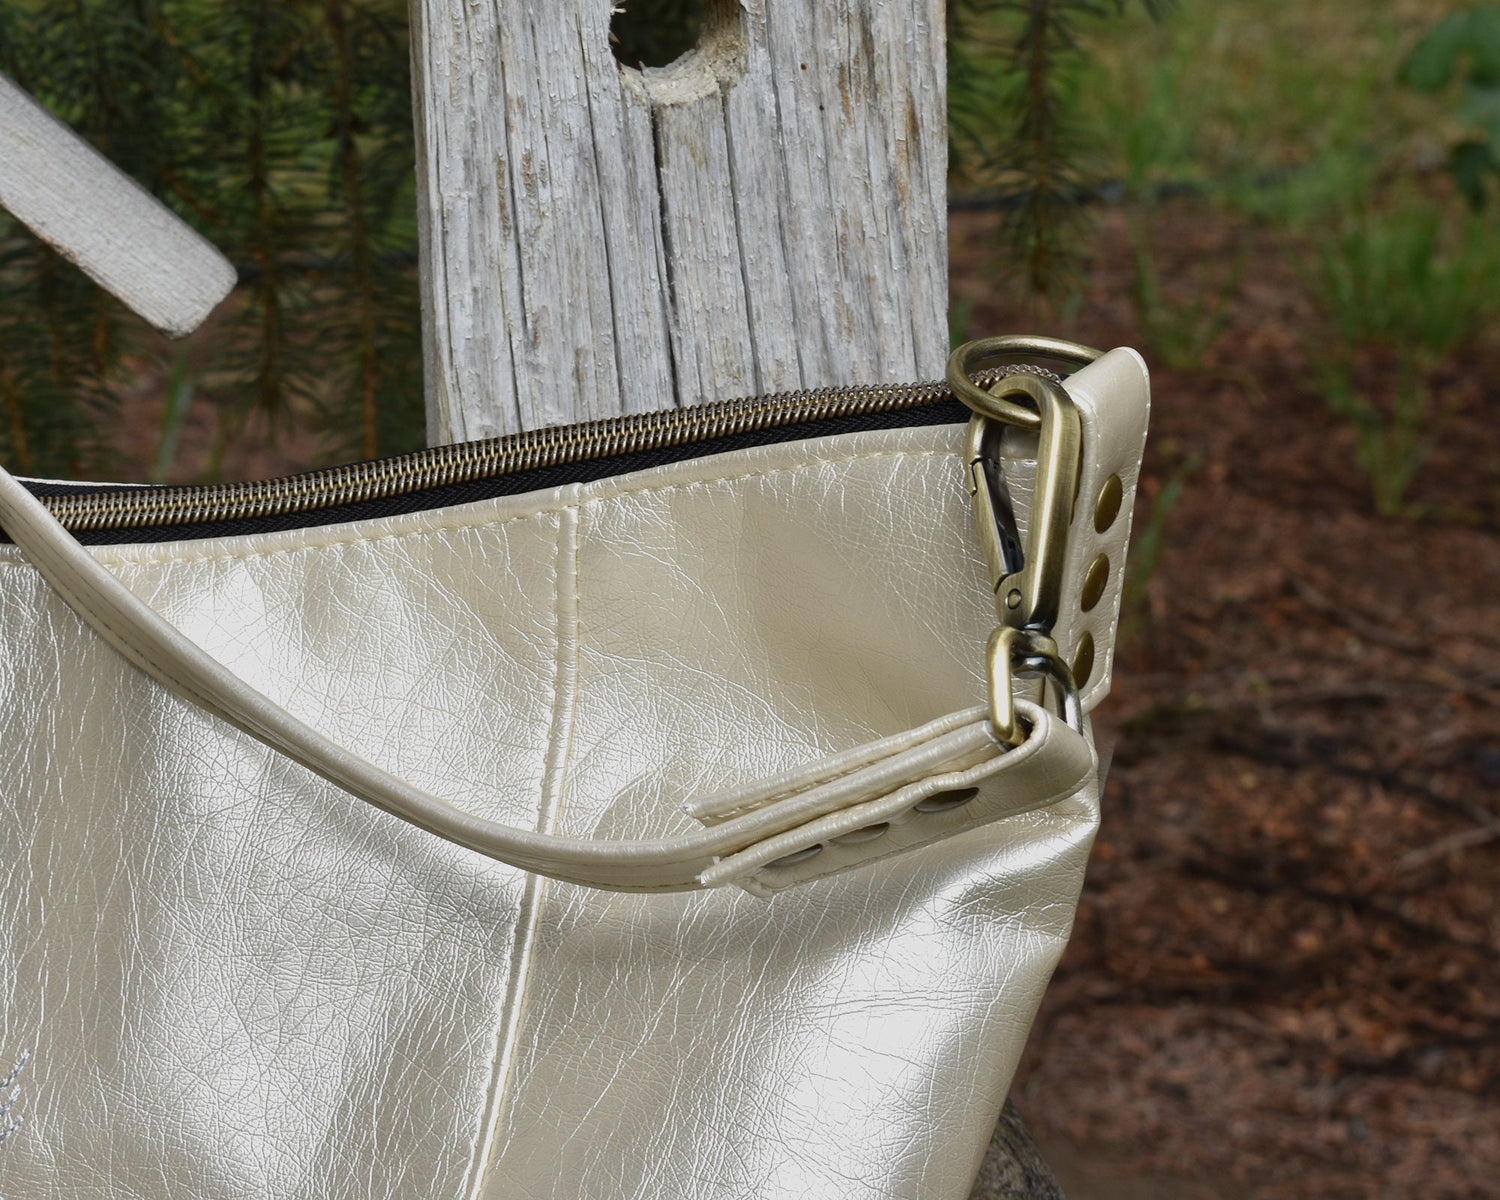 Conceal Carry Hobo Style Purse - Modern Style Shoulder Bag - Gift for a Gun Lover - Right or Left Carry CC or CCW